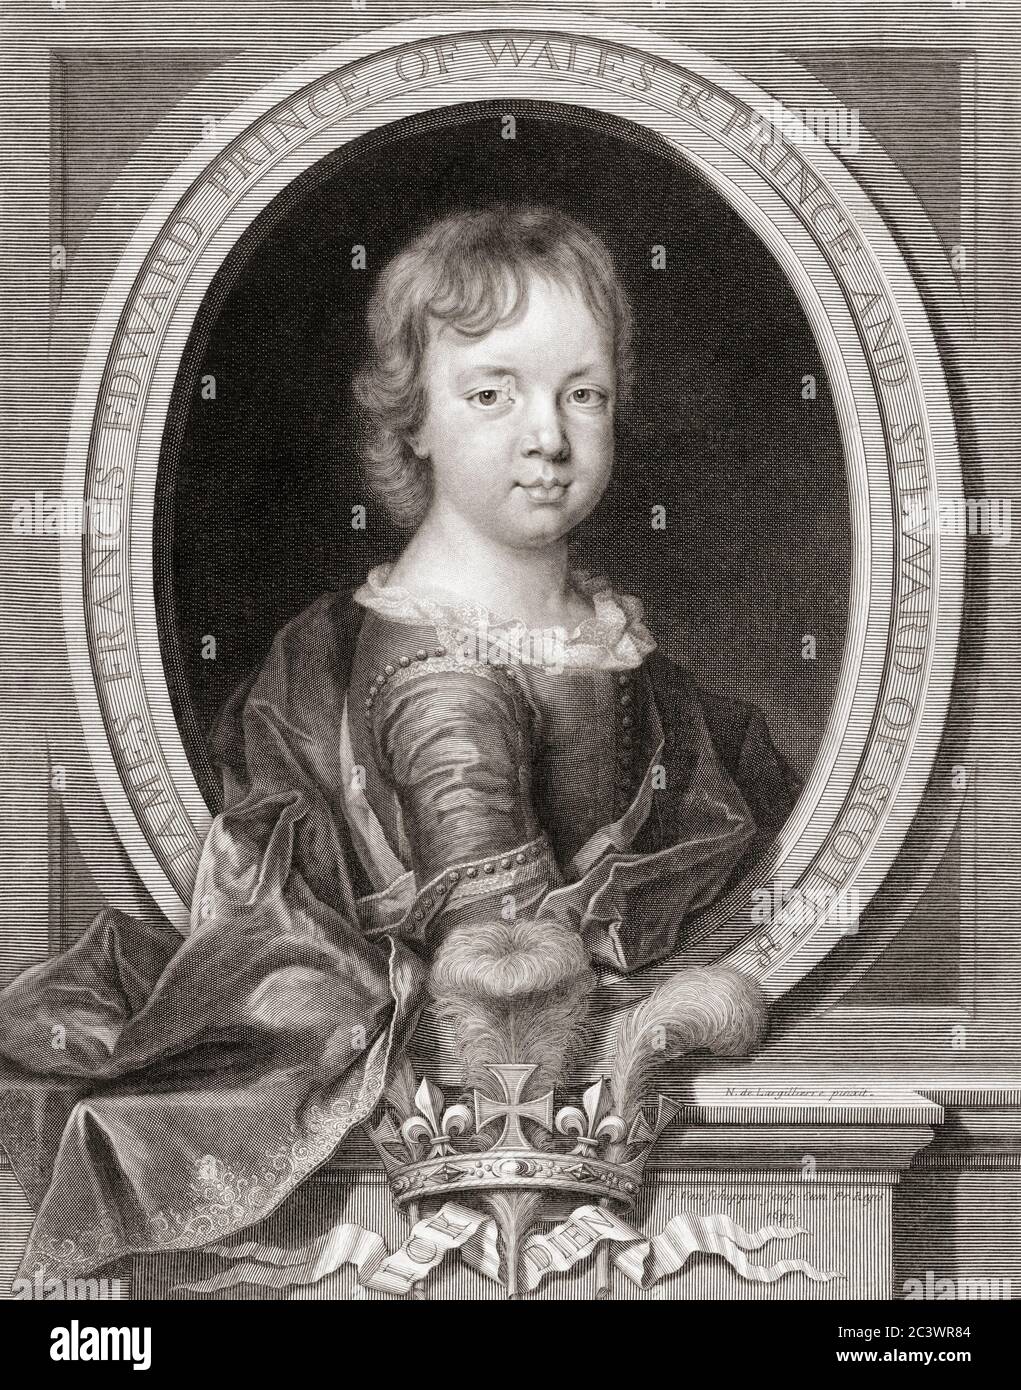 Prince James Francis Edward Stuart, 1688 - 1766.  Claimant to the English, Scottish and Irish crowns.  Known as the Old Pretender.  Seen here as a child.  From an engraving by Pieter Louis van Schuppen, after a work by Nicolas de Largillière. Stock Photo